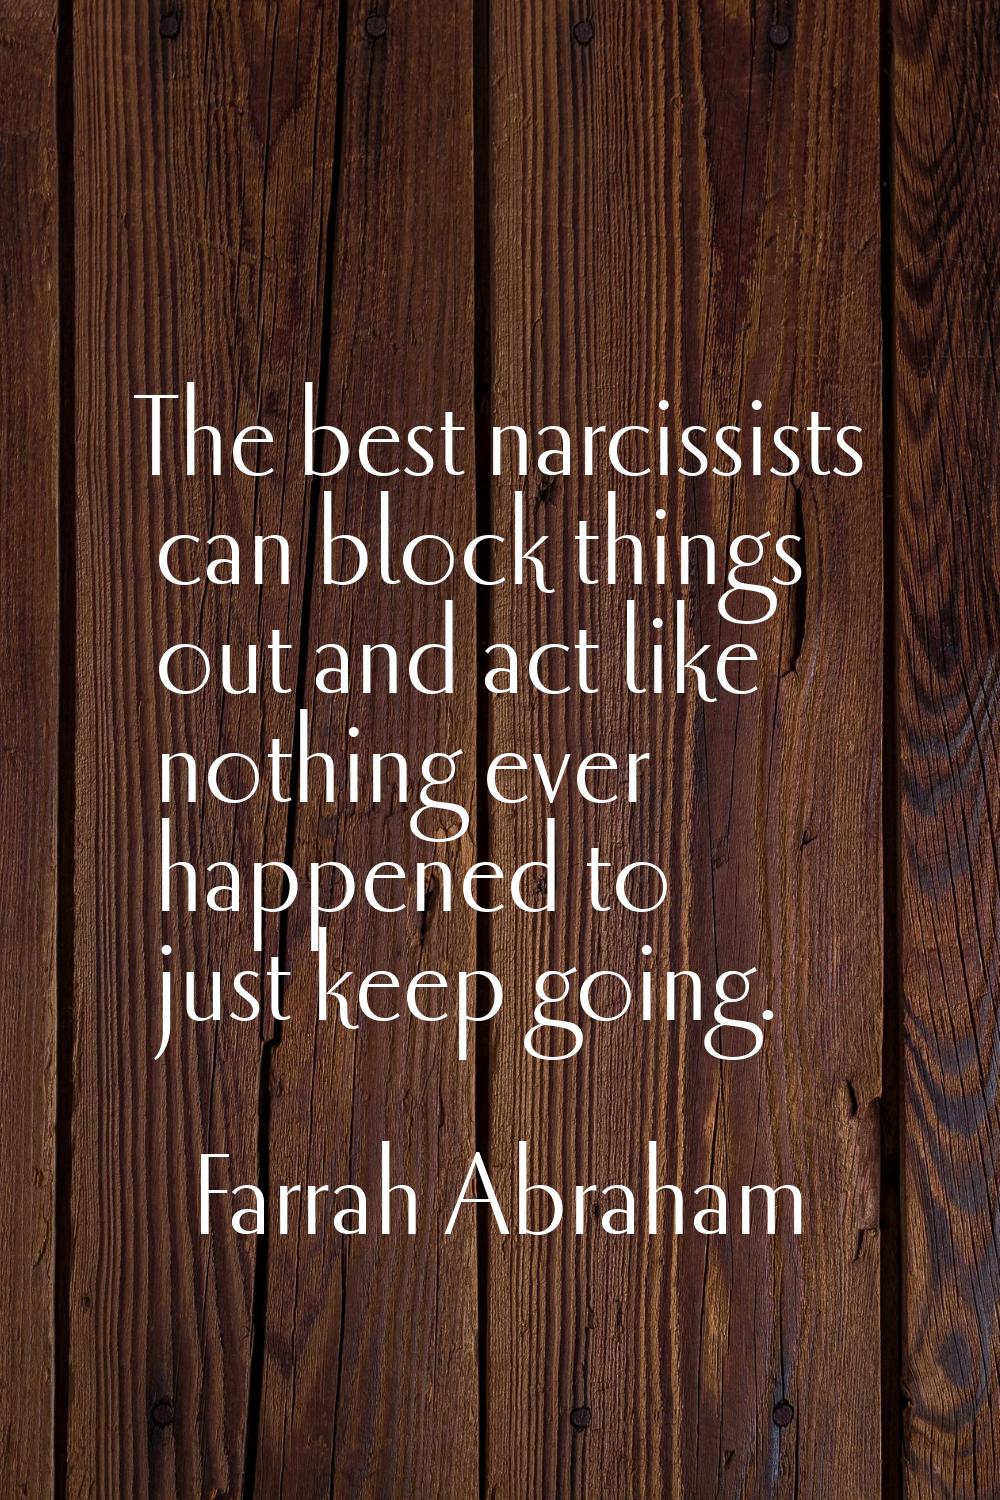 The best narcissists can block things out and act like nothing ever happened to just keep going.